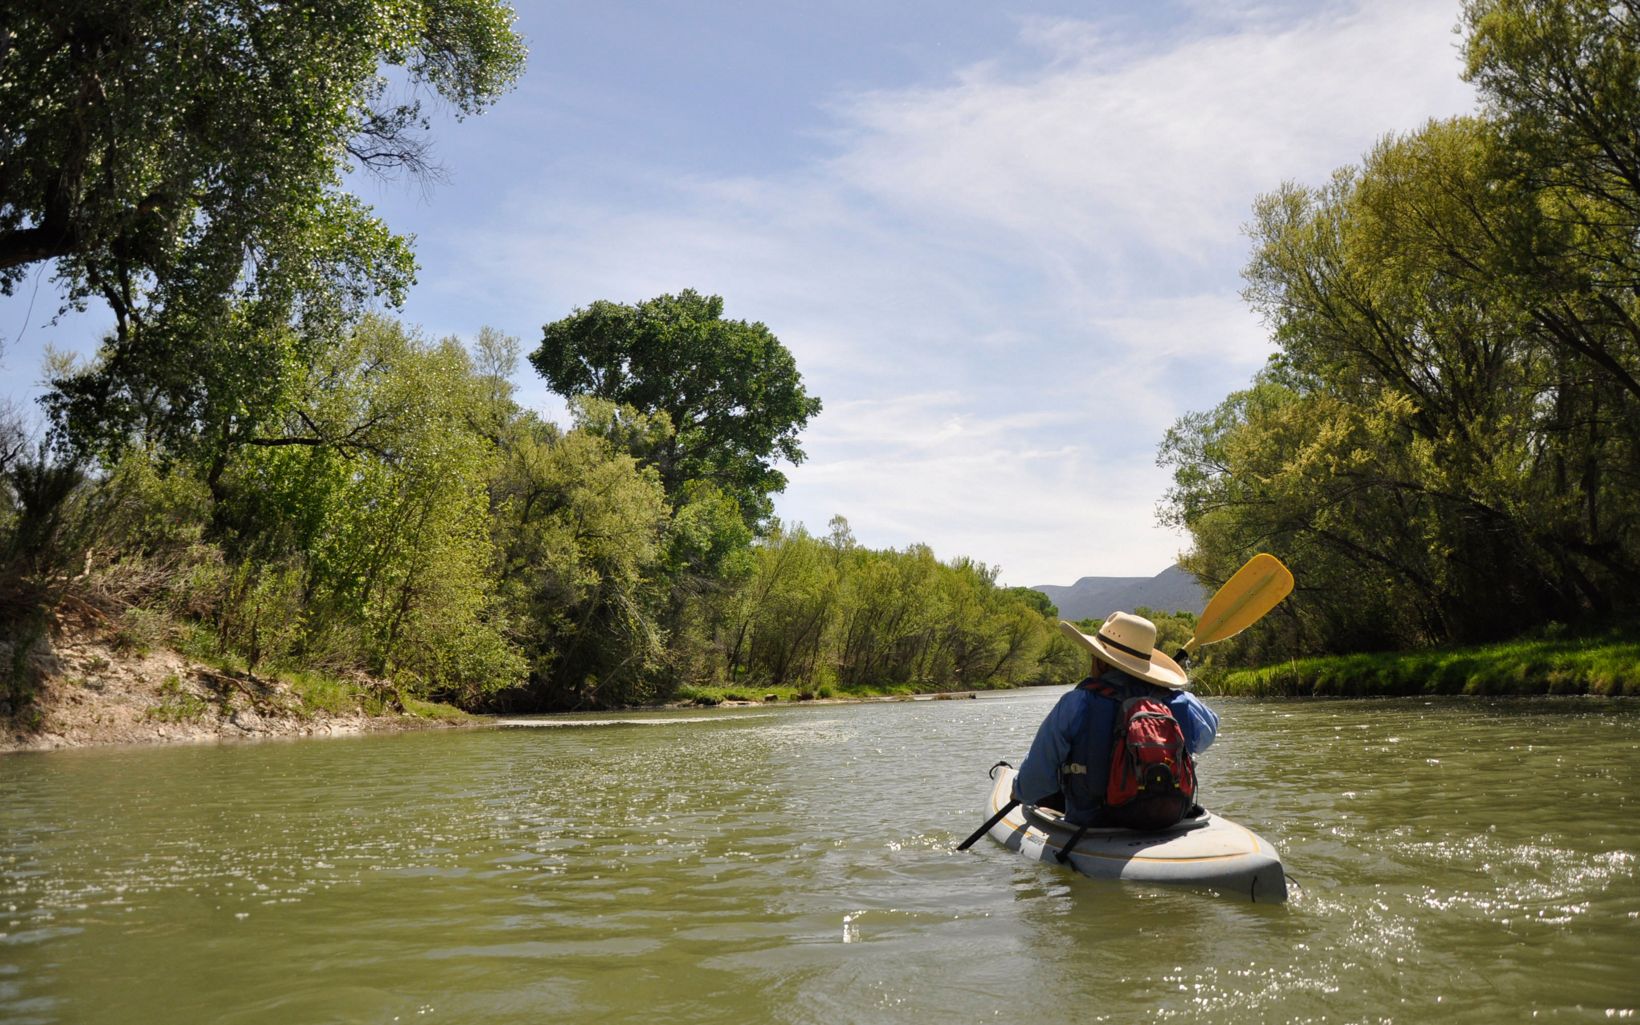 Kayaking the Verde River near Camp Verde, Arizona. Flow has increased in this 20-mile stretch due to Conservancy partnerships with irrigators.